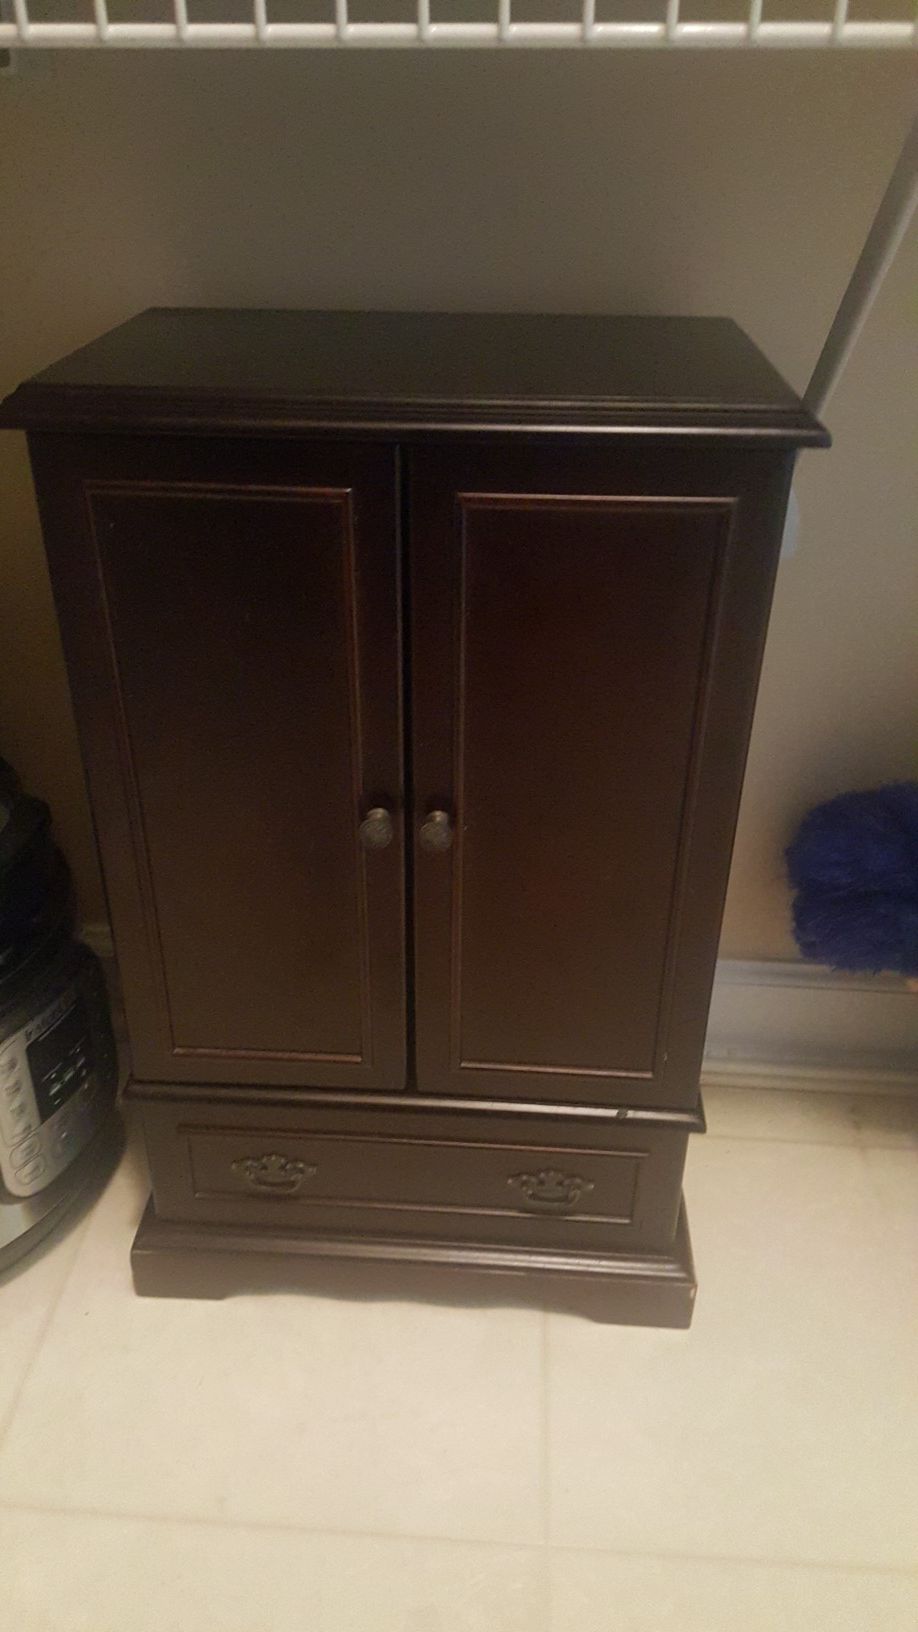 Used Jewelry Box in good condition